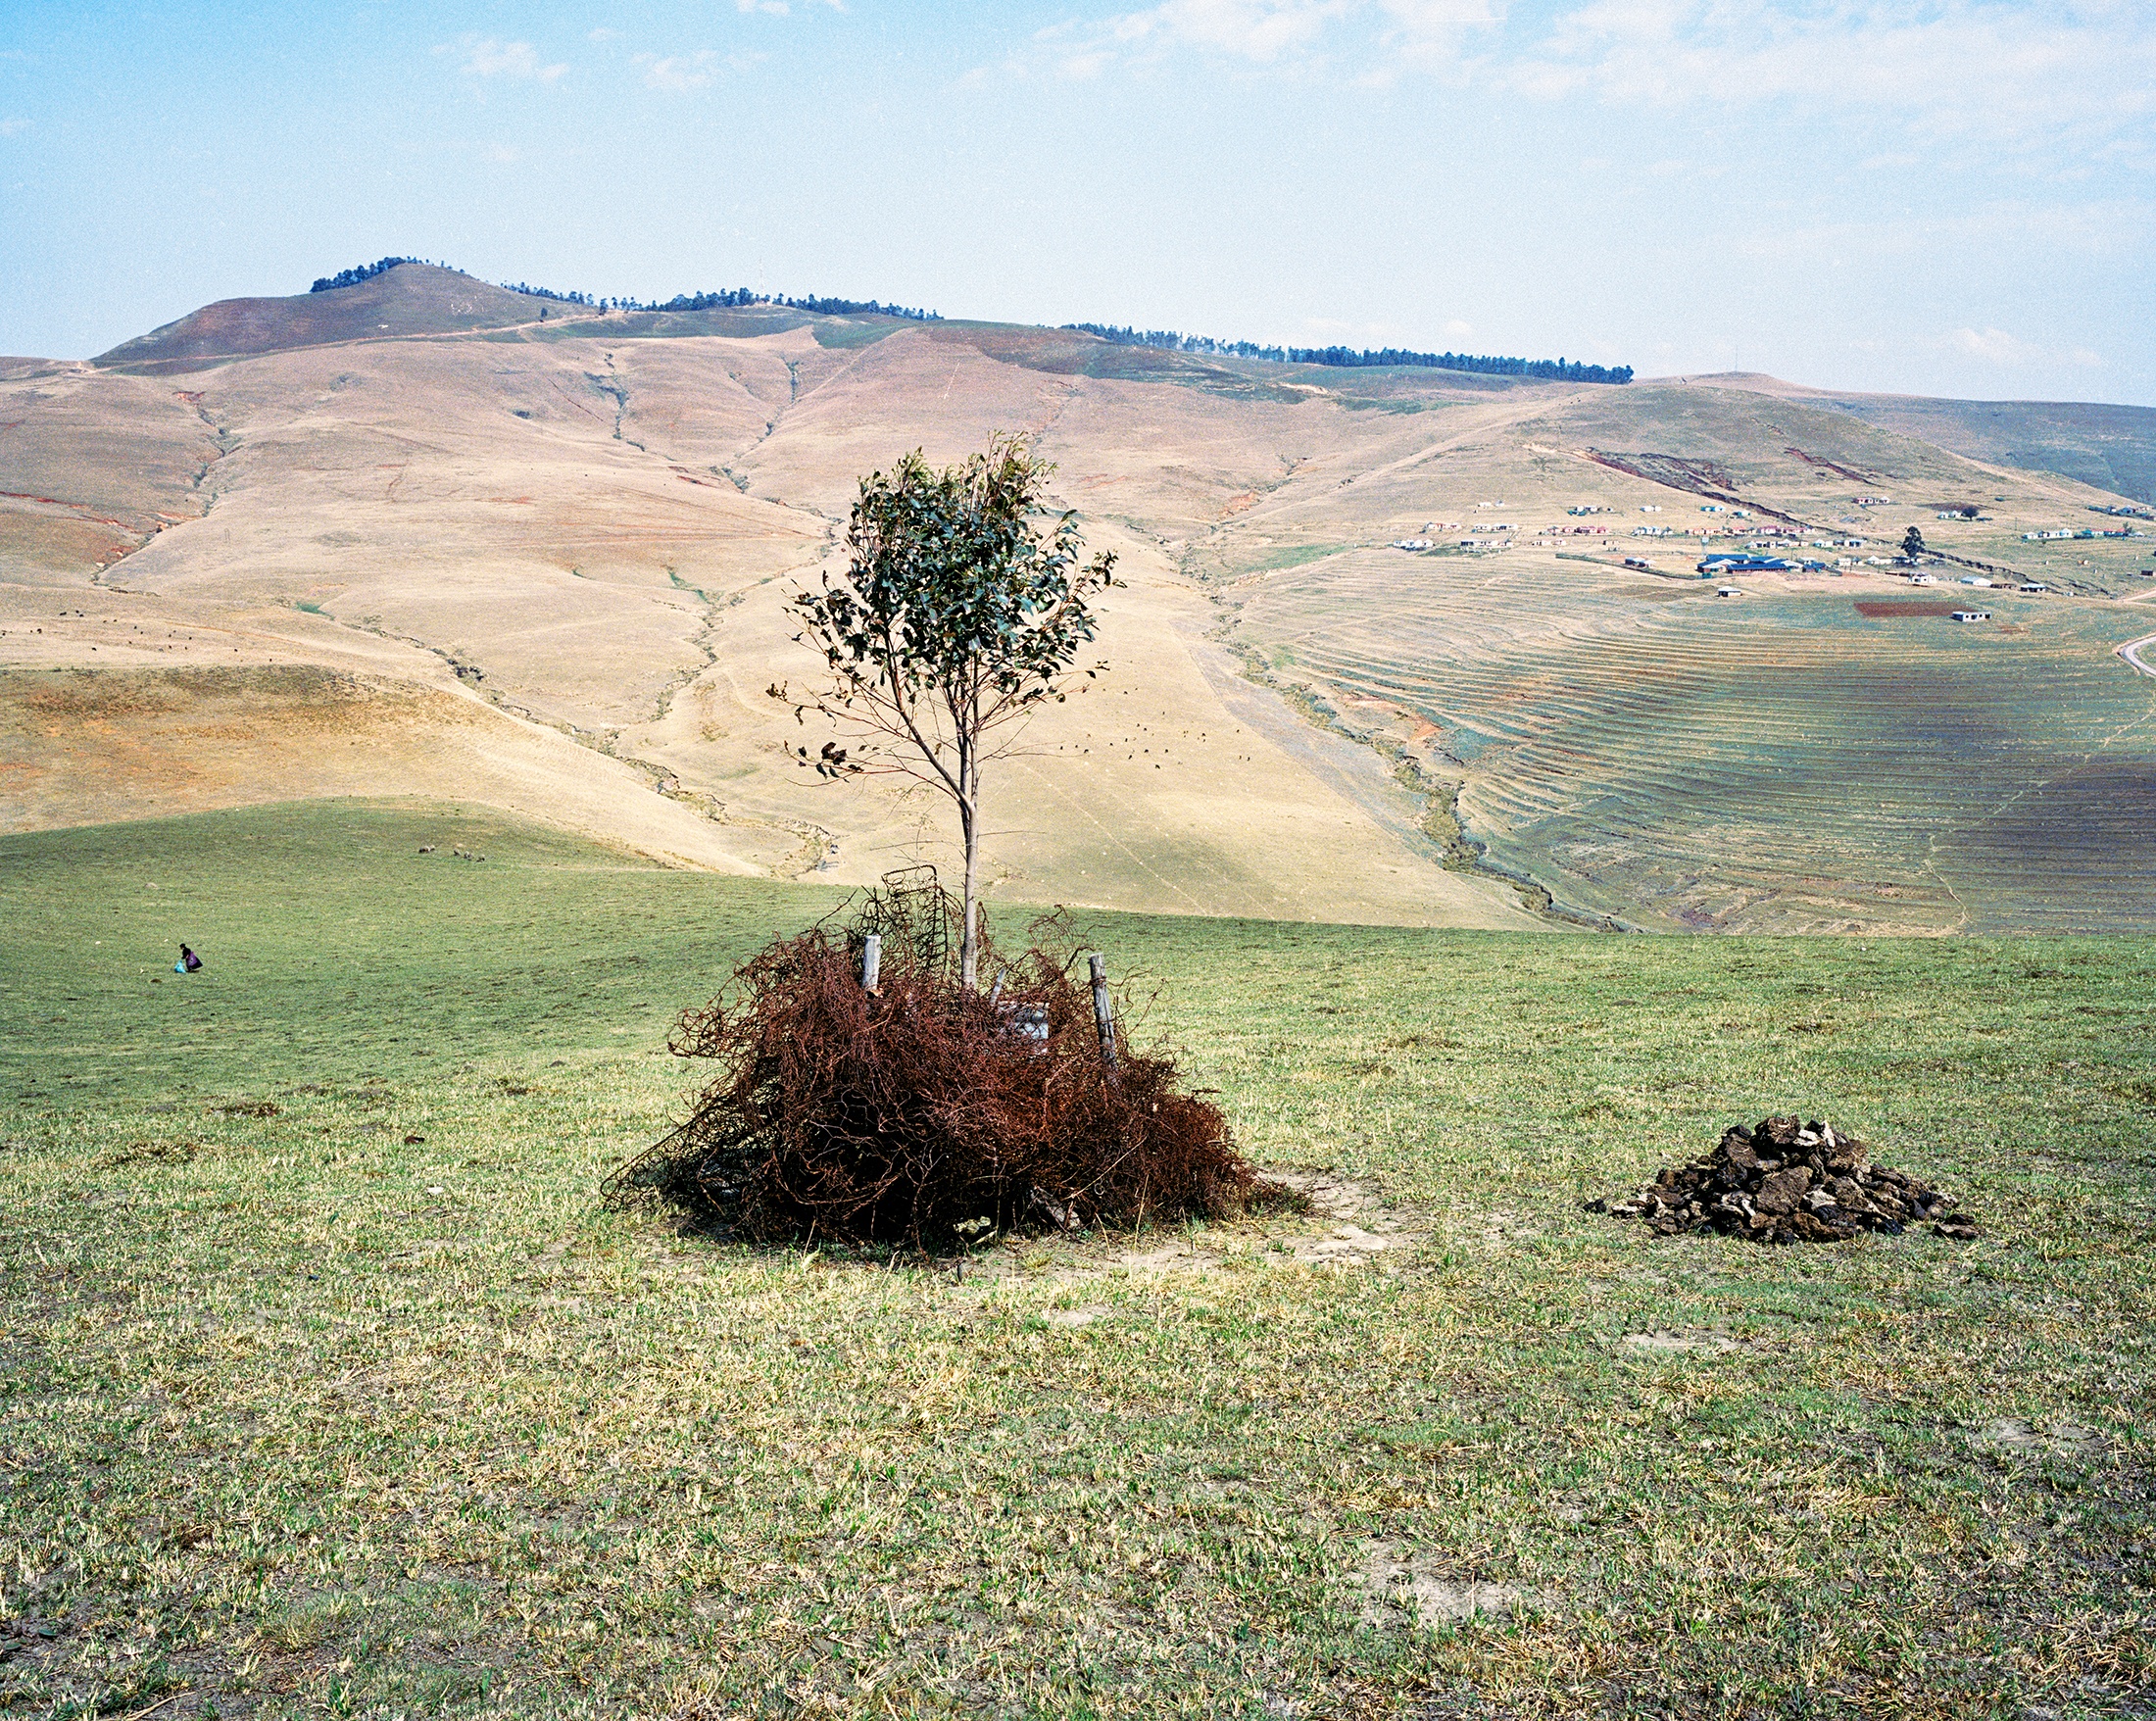 Lindokuhle Sobekwa's photograph 'Symbol of graves' shows a small tree in a grassy landscape with a tangle of rusted metal at its base.
